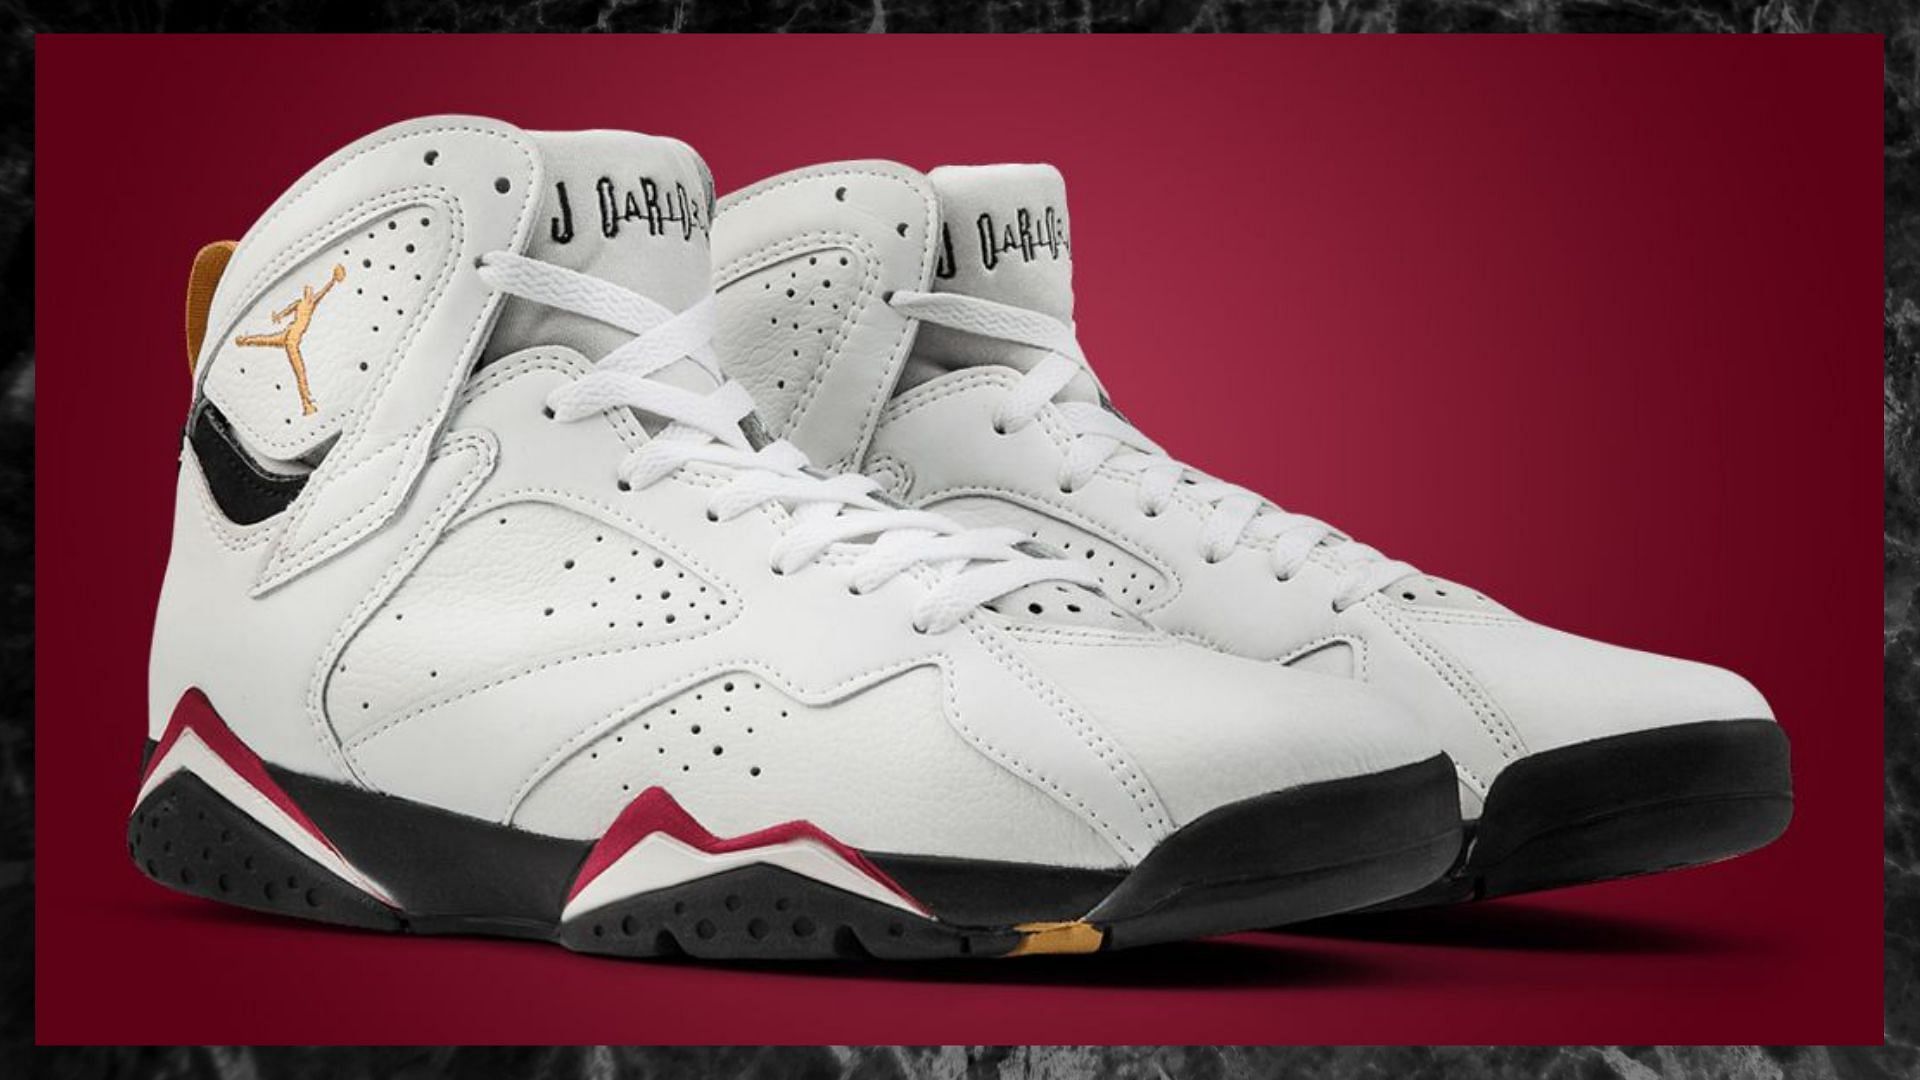 Where to buy Air Jordan 7 Cardinal shoes? Price, release date, and